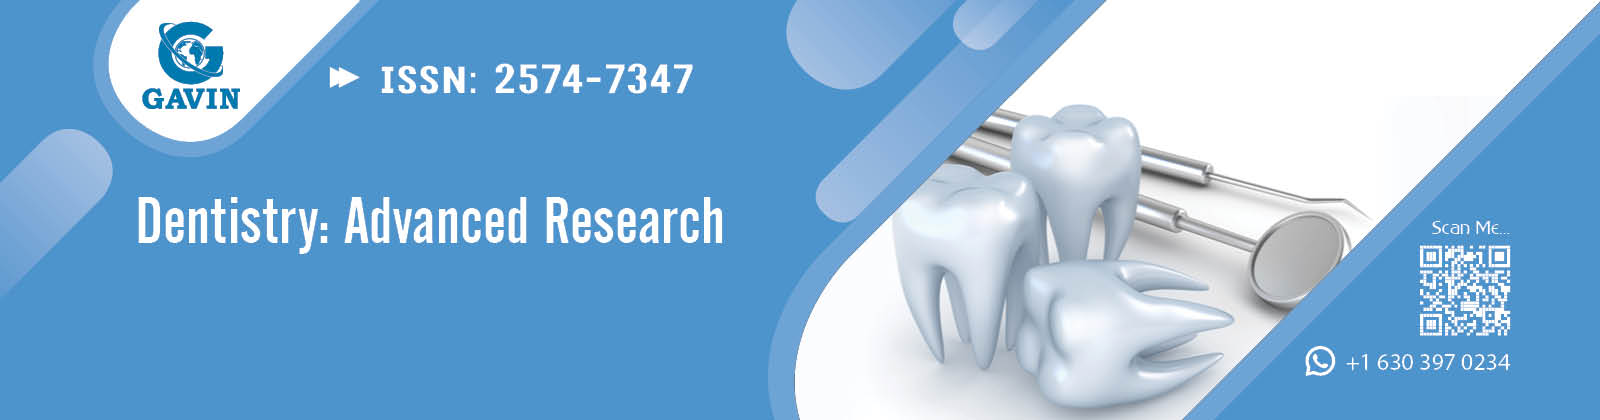 Dentistry: Advanced Research 